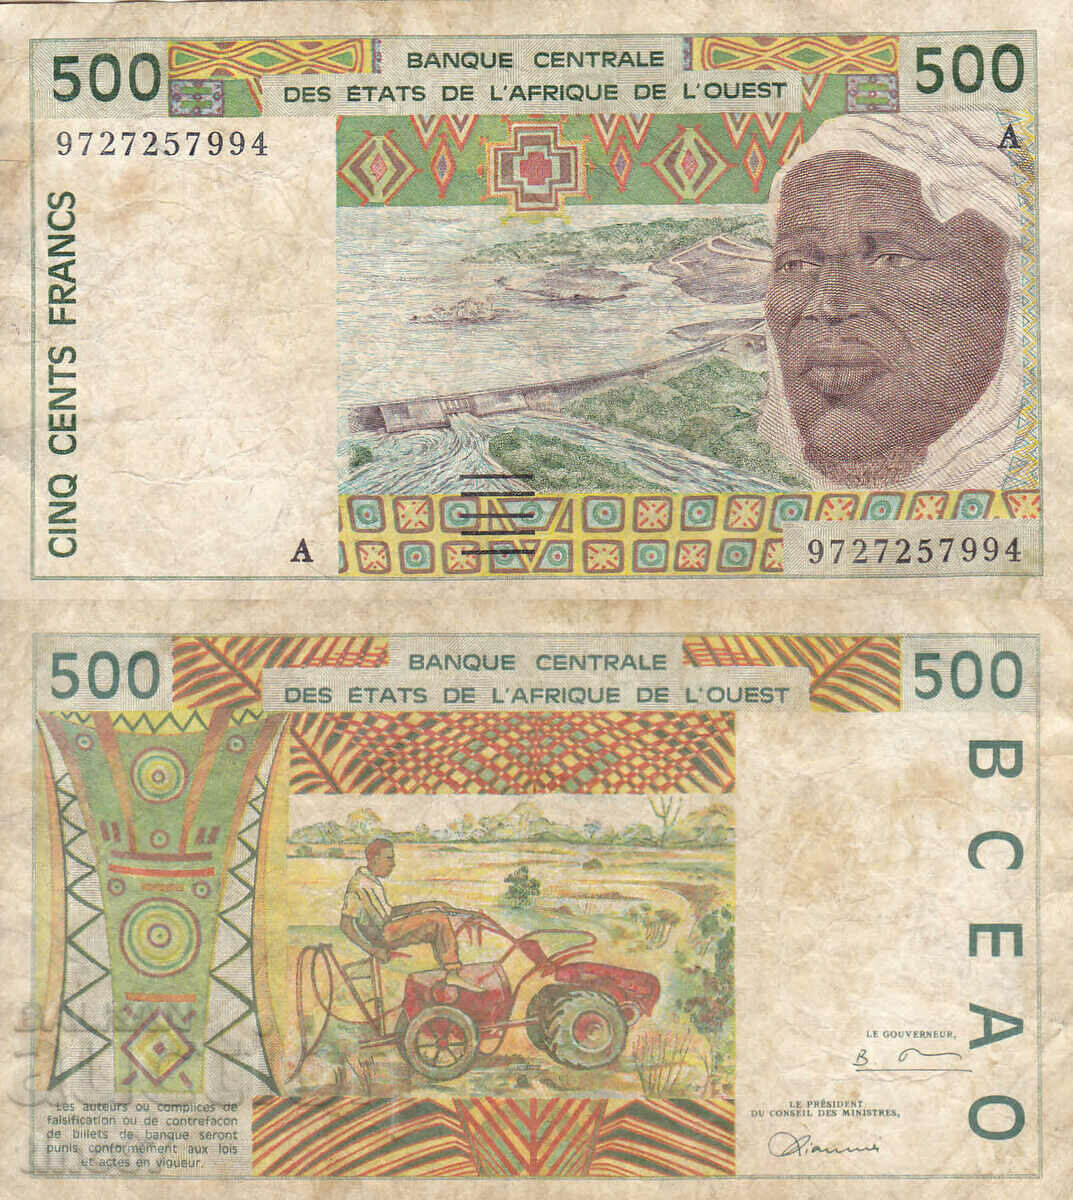 tino37- ZAP. AFRICA /COTE D' IVORY/ - 500 FRANC - 1997